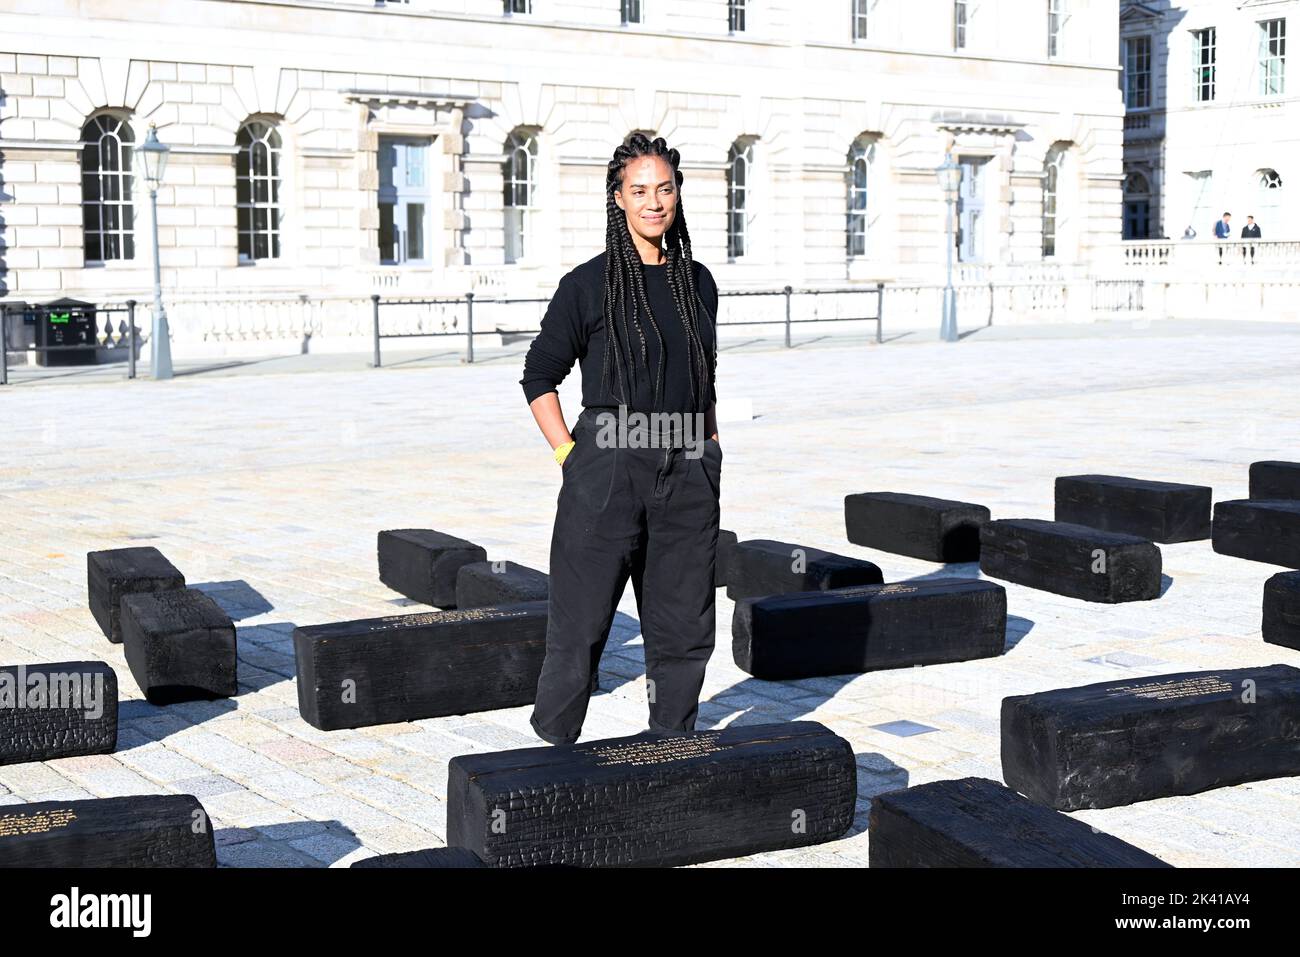 Interdisciplinary artist Grada Kilomba brings her critically acclaimed installation O Barco/The Boat to Somerset House this Autumn. Displayed in the UK for the first time , the large installation and performance is specially presented by Somerset House on the occasion of the 10th anniversary of the 1-54 Contemporary African Art Fair .Grada  Kilomba is a Portuguese Berlin based transdisciplinary artist whose work draws on memory , trauma , gender and post colonialism ... Stock Photo